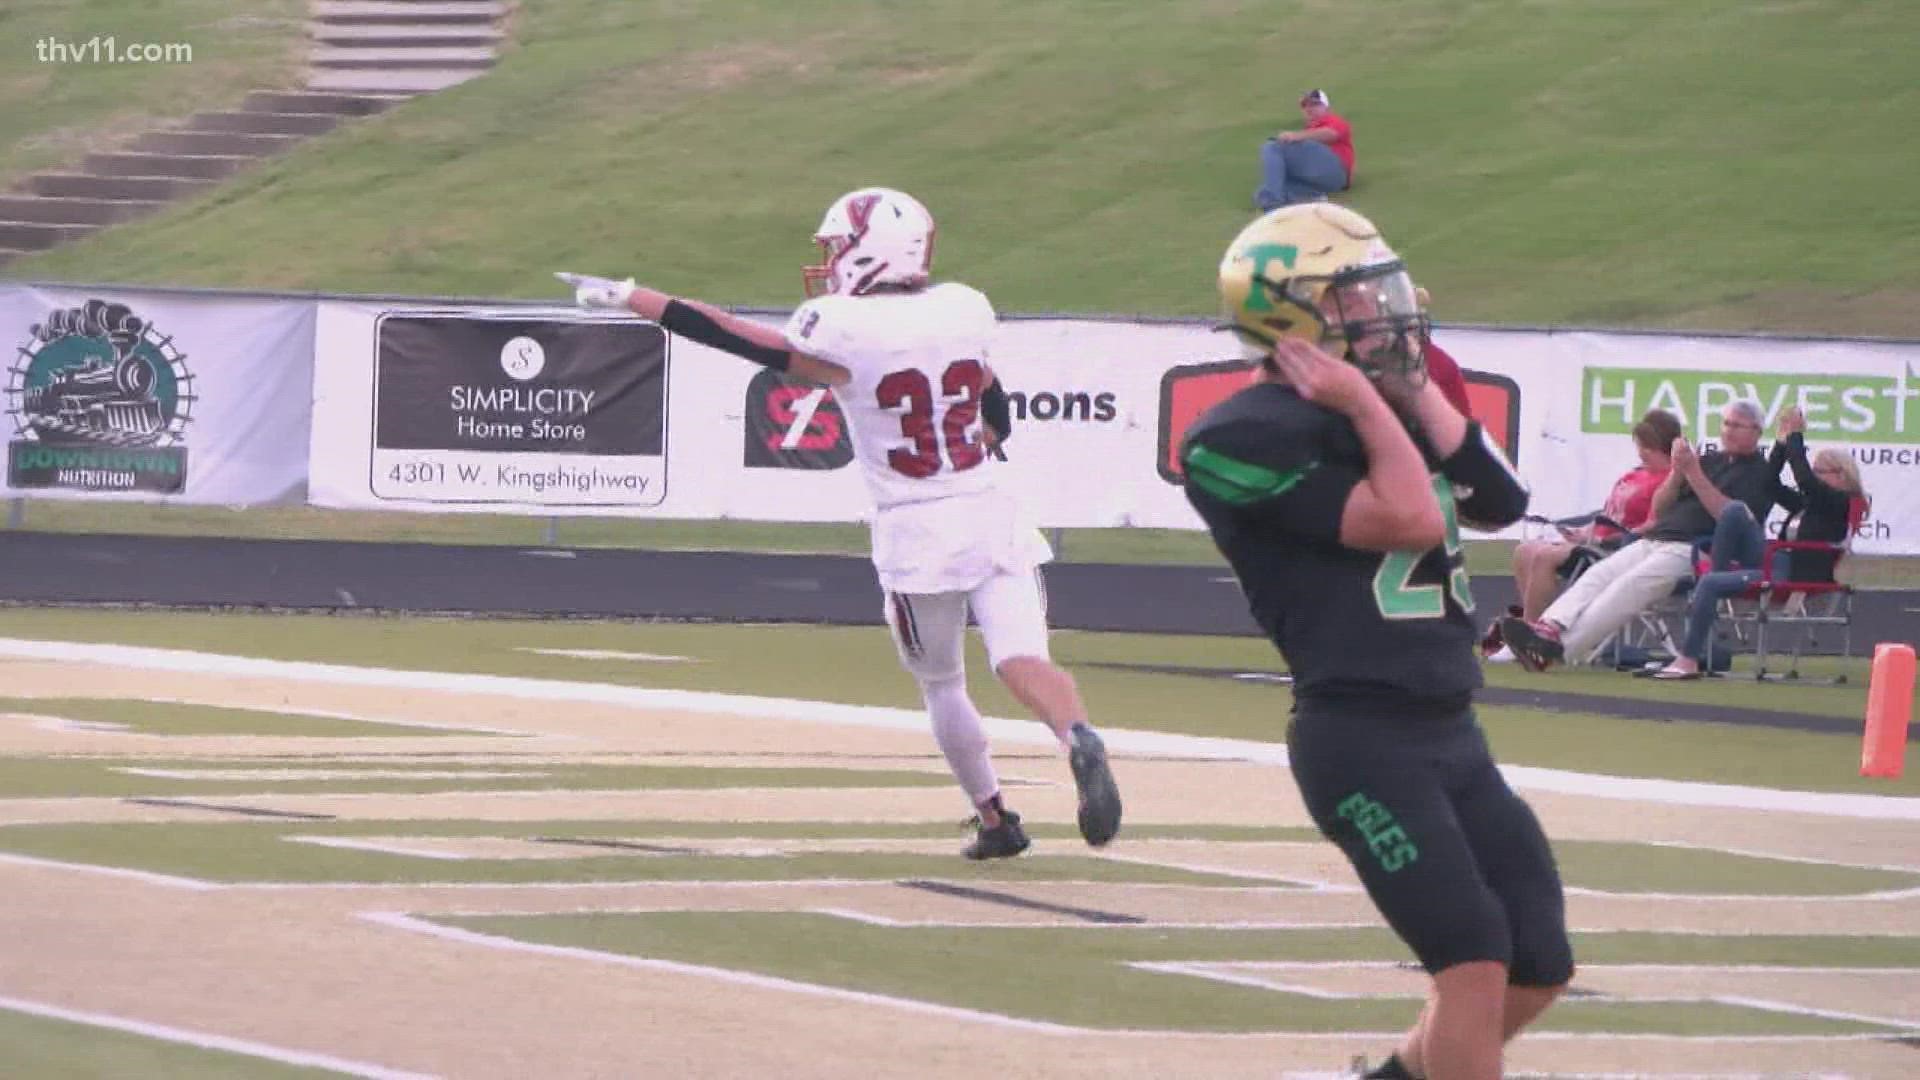 The Vilonia Eagles defeated the Green County Tech Eagles 55-17 in Vilonia's season opener